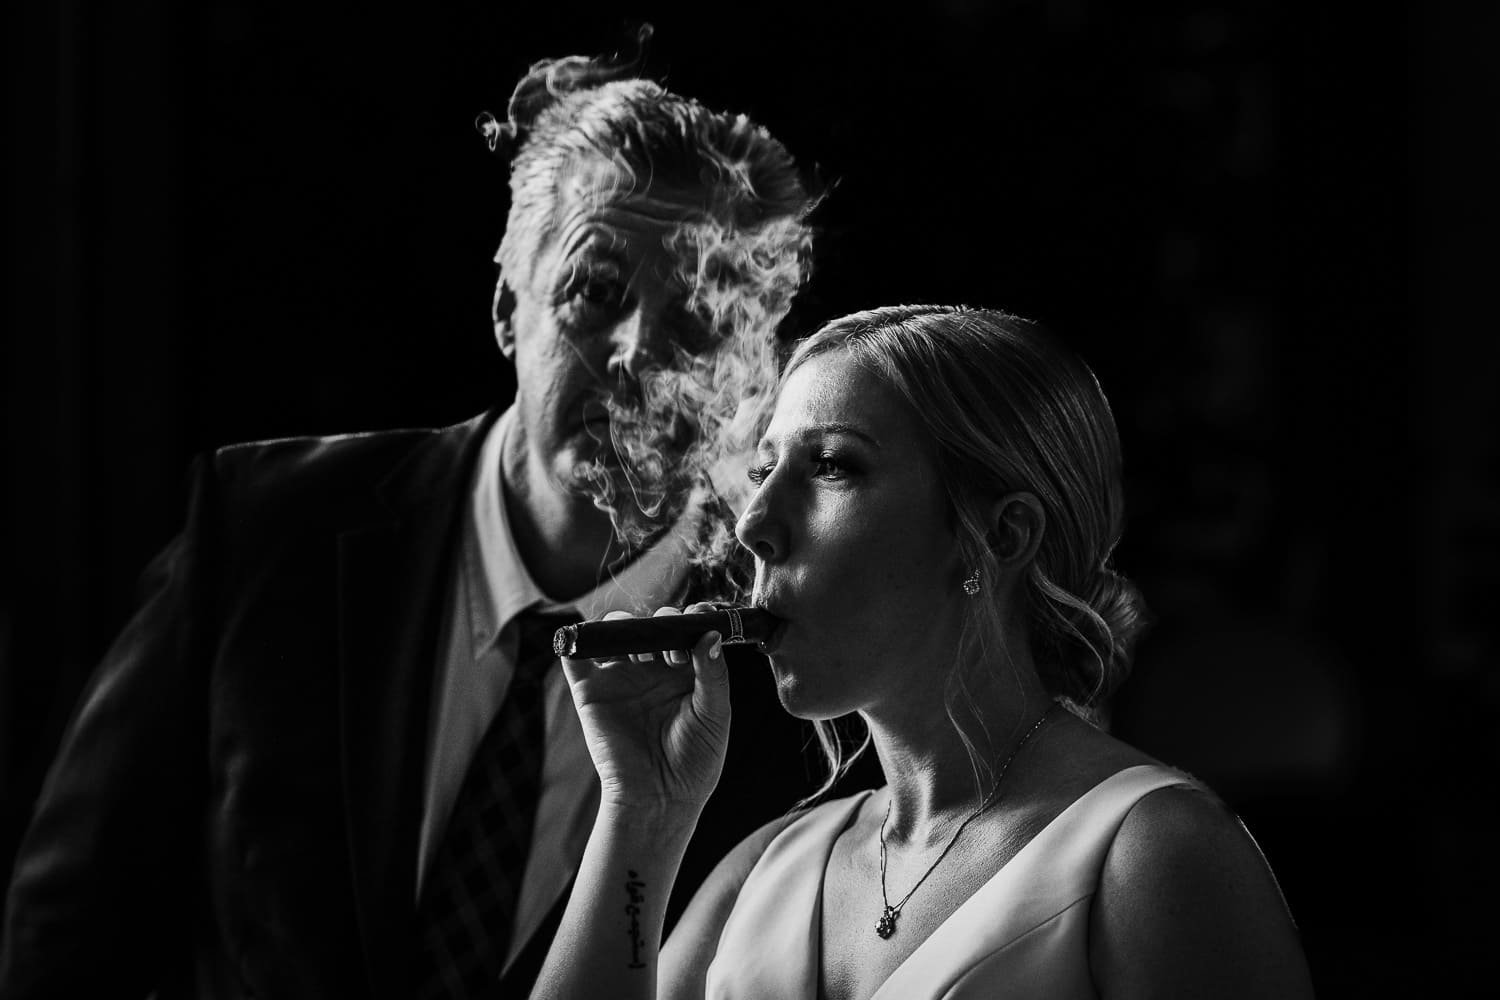 St. louis wedding photographer that captures real moments.jpg